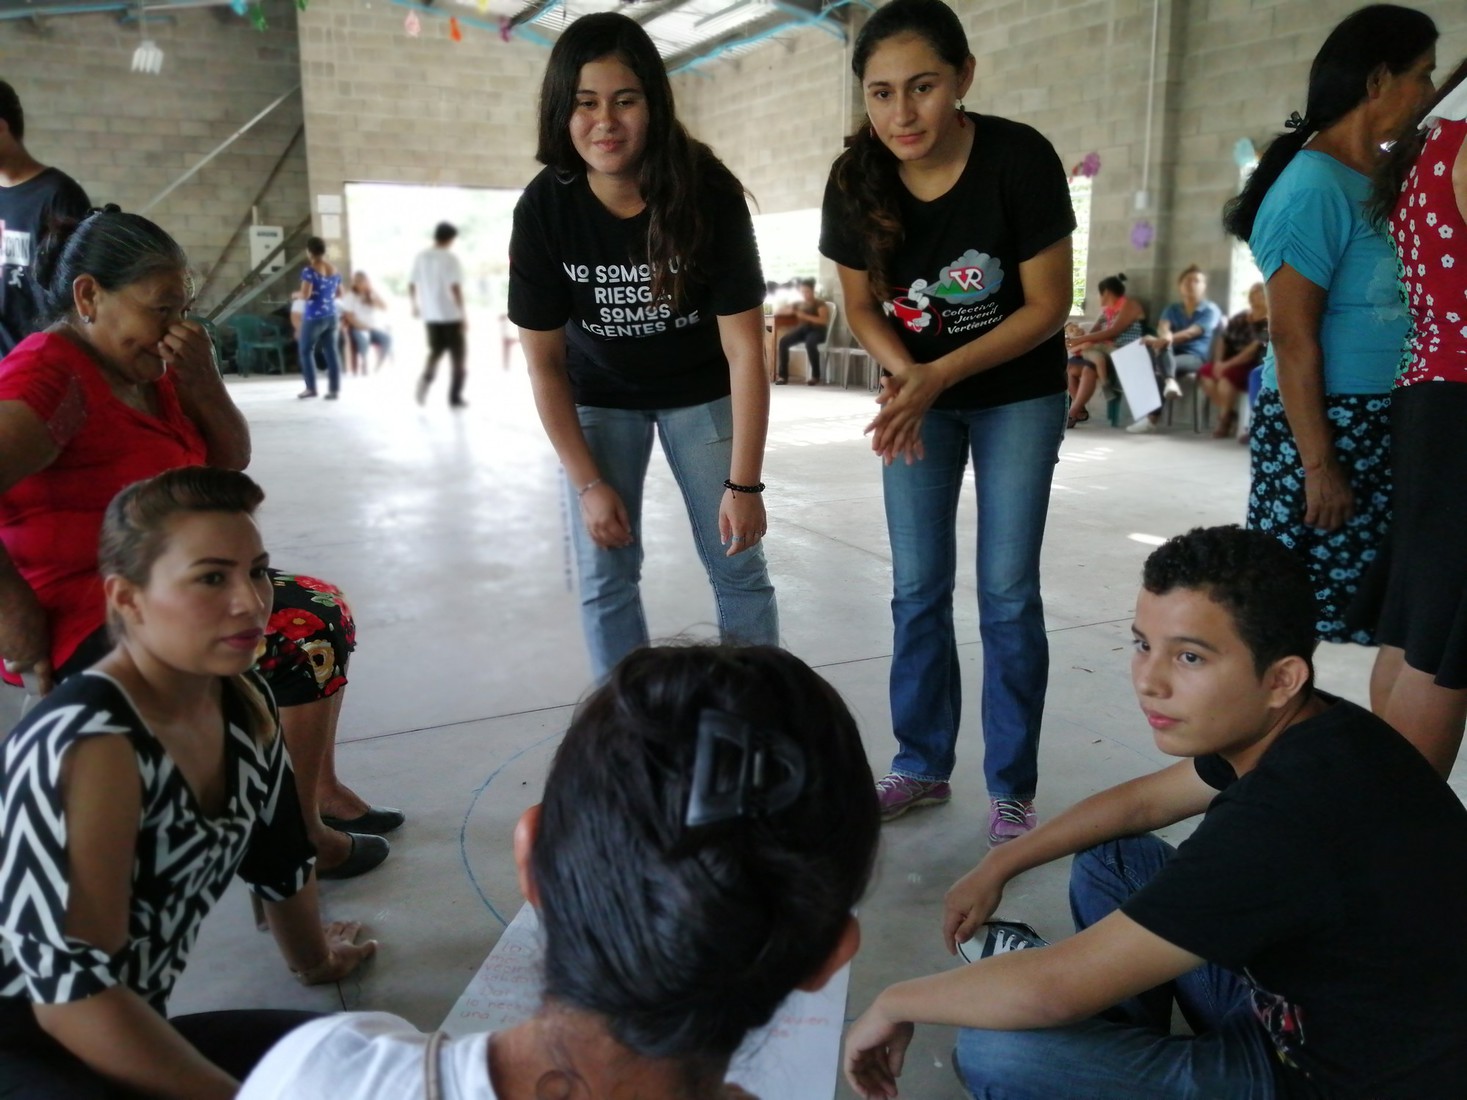 A group of young people discussing in a circle during a peace festival